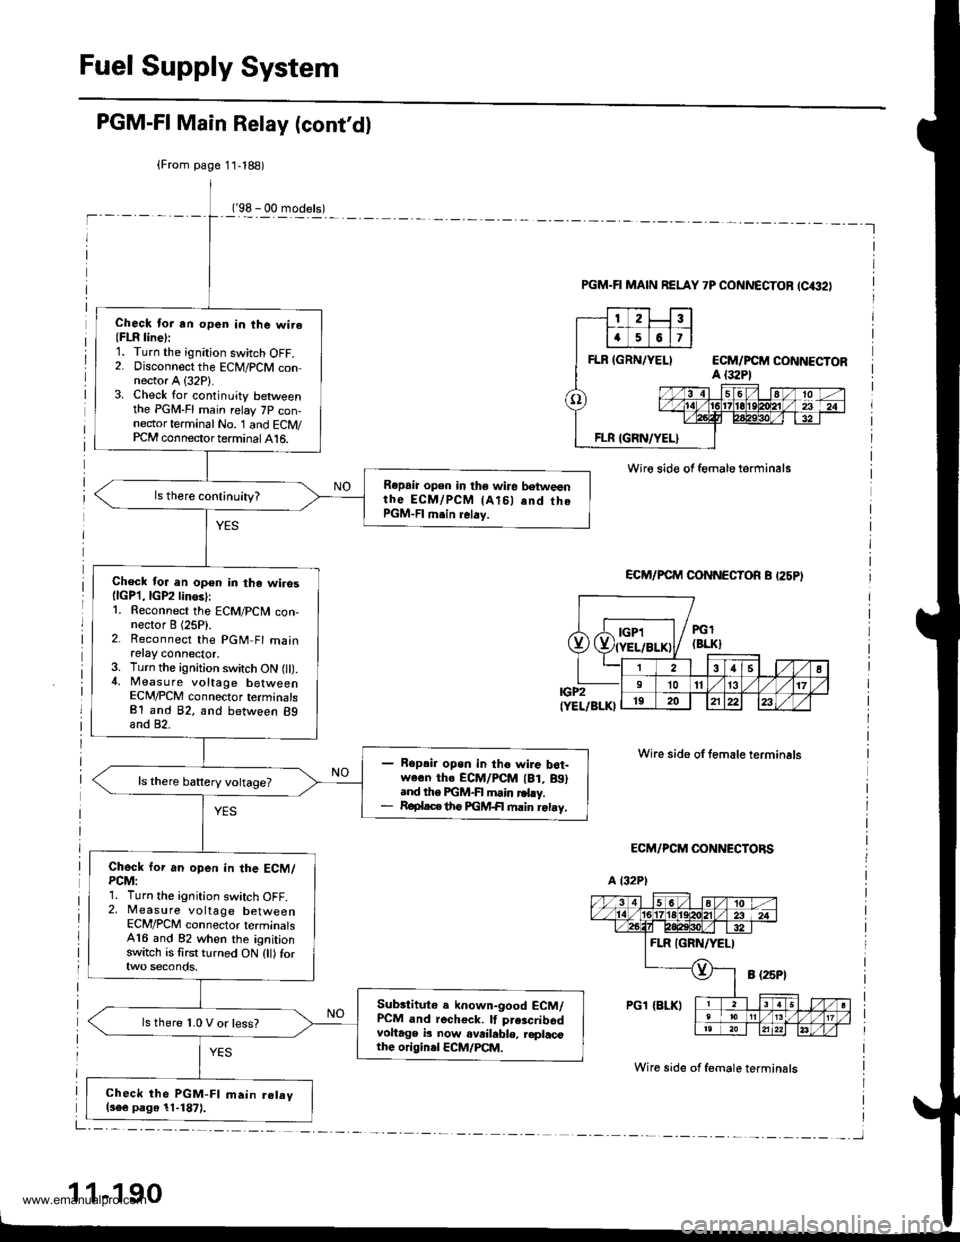 HONDA CR-V 1999 RD1-RD3 / 1.G Workshop Manual 
Fuel Supply System
PGM-FI Main Relay (contdl
(98 - 00 models)-l
(From page 11,188)
Check lor an open in the wire(FLR line):1. Turn the ignition switch OFF.2. Disconnect the ECM/PCM connector A (32P